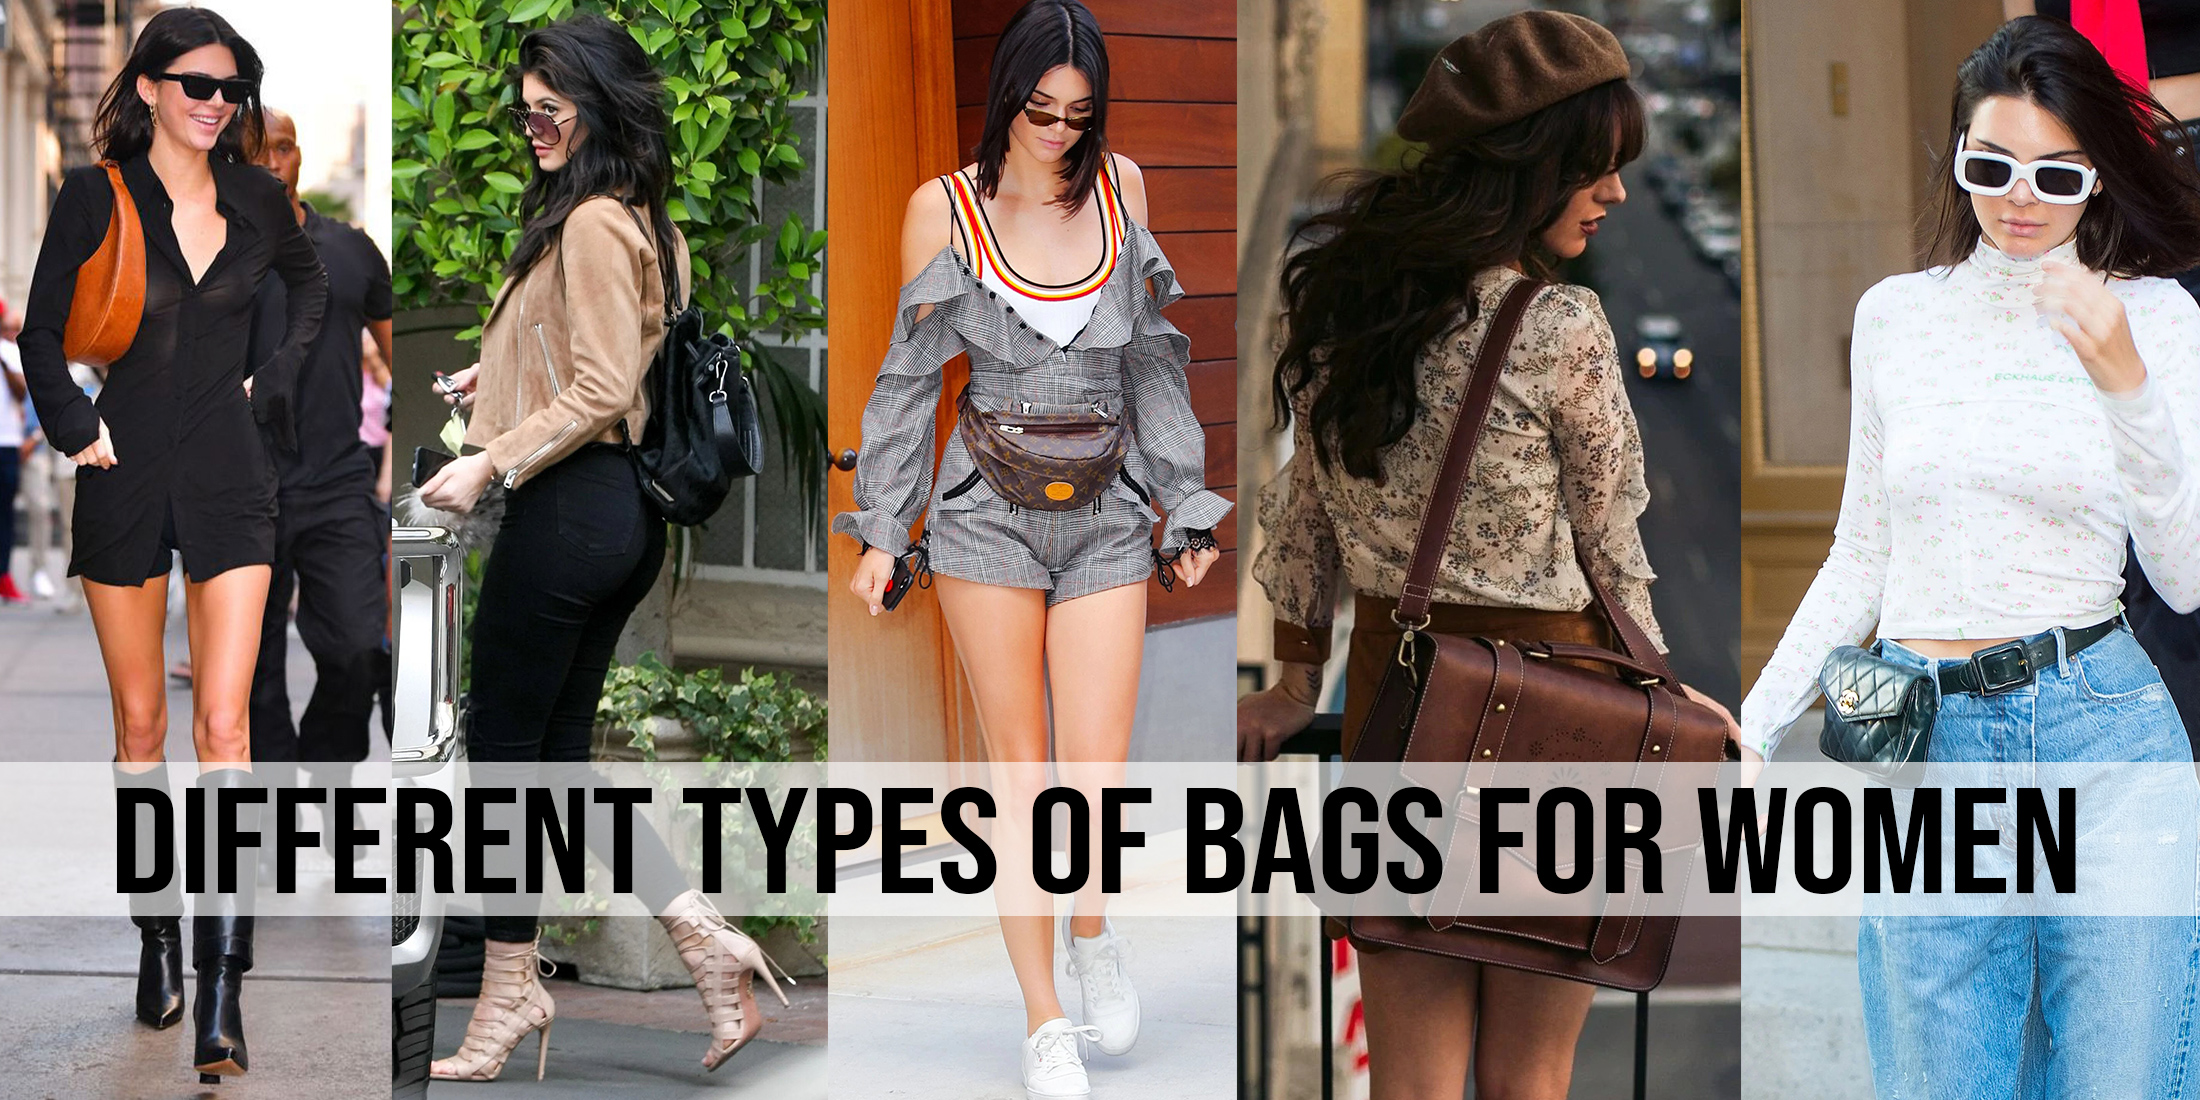 There Are 2 Types of Handbags That Will Always Be Stylish